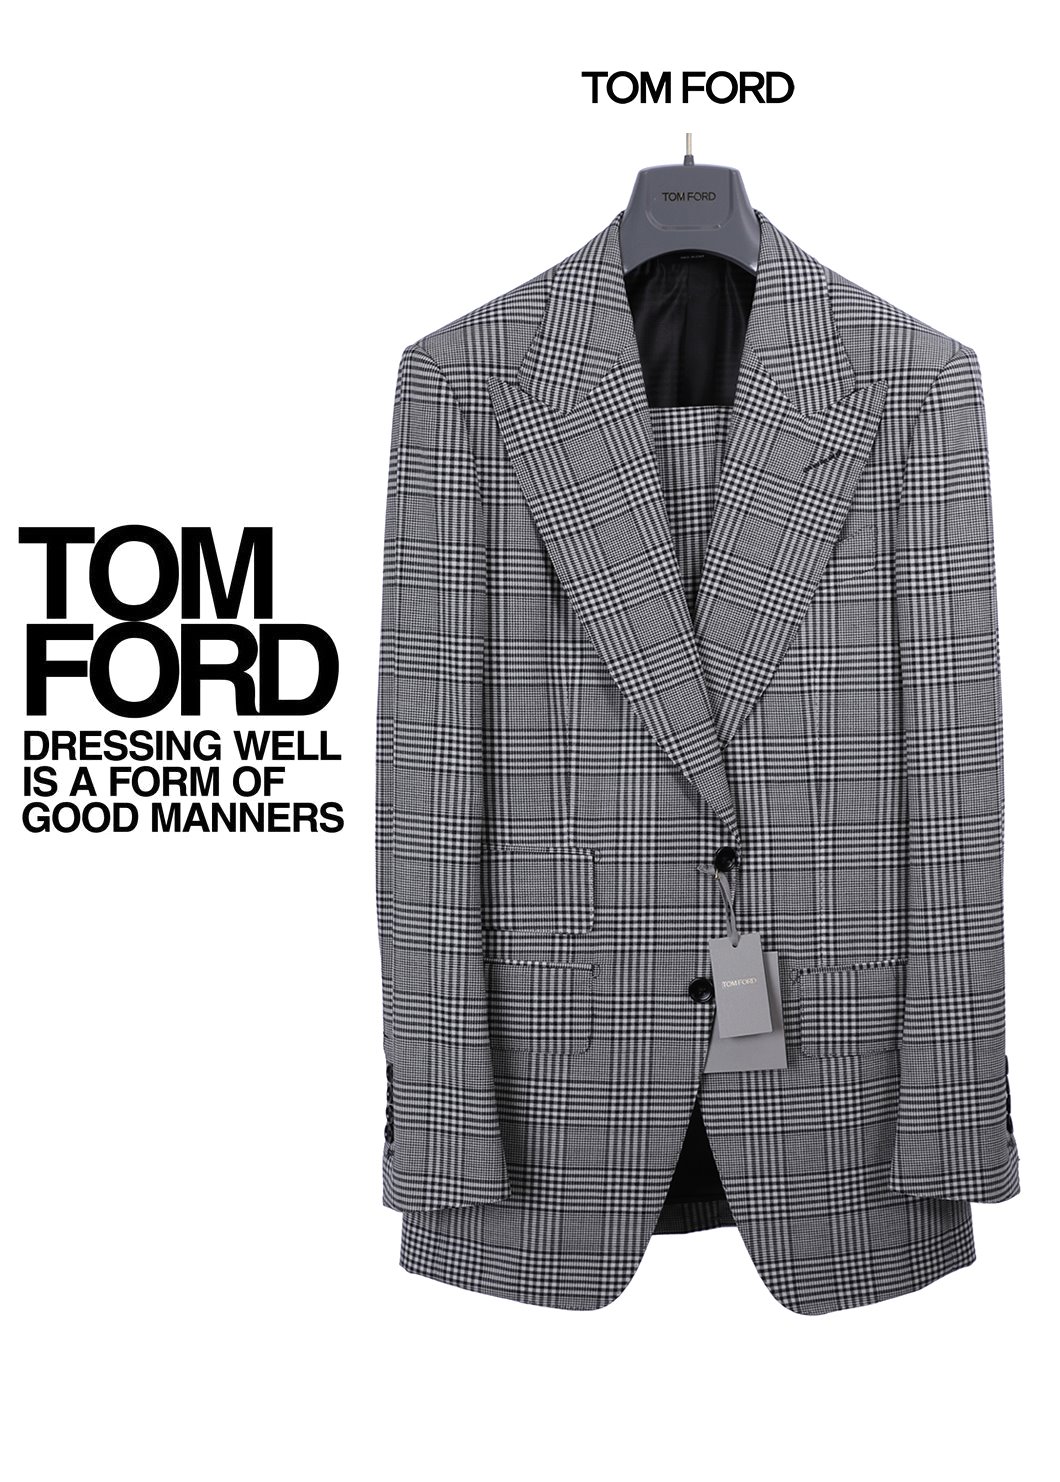 TOMFORD Atticus Gray Gingham Check Suit